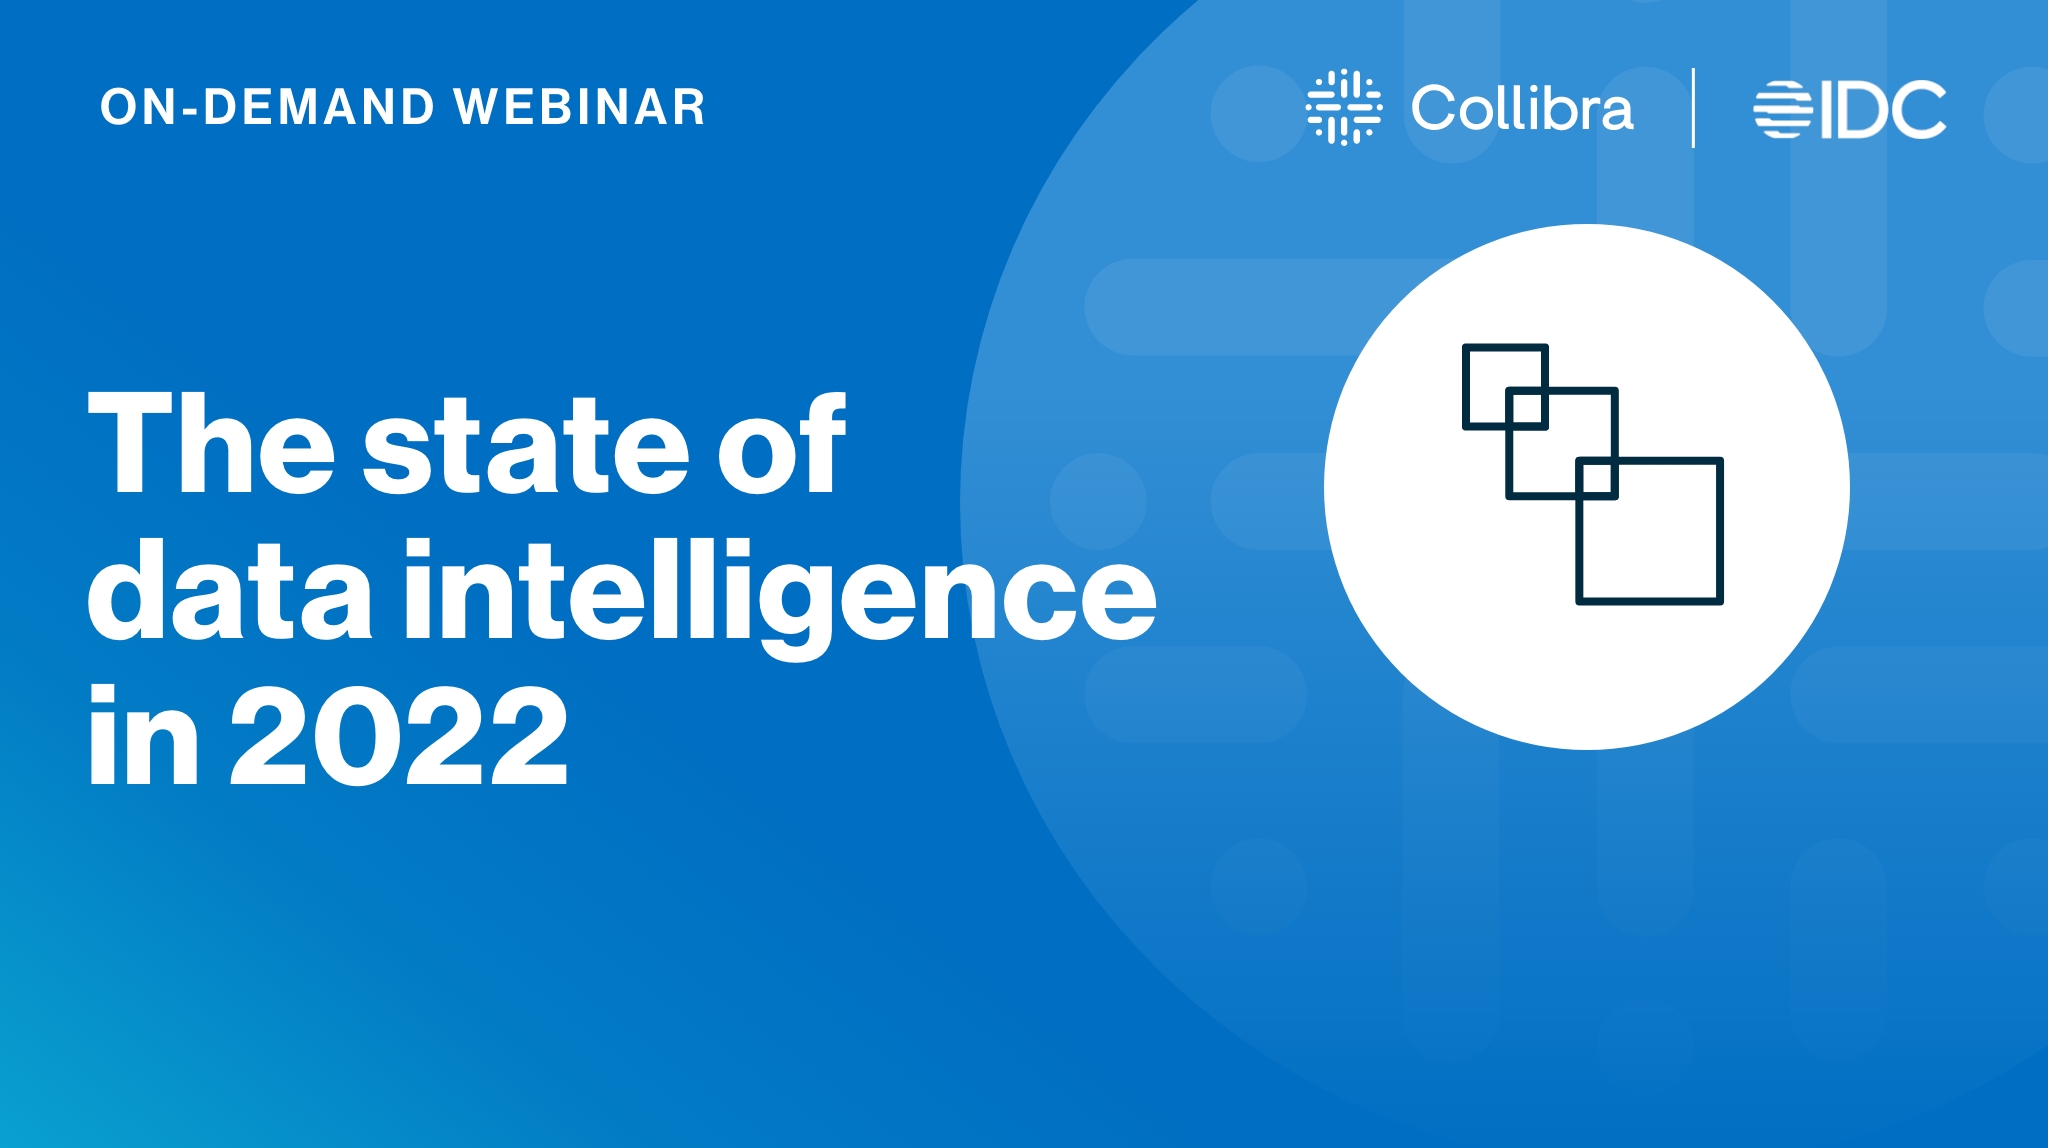 Load video: The state of data intelligence in 2022